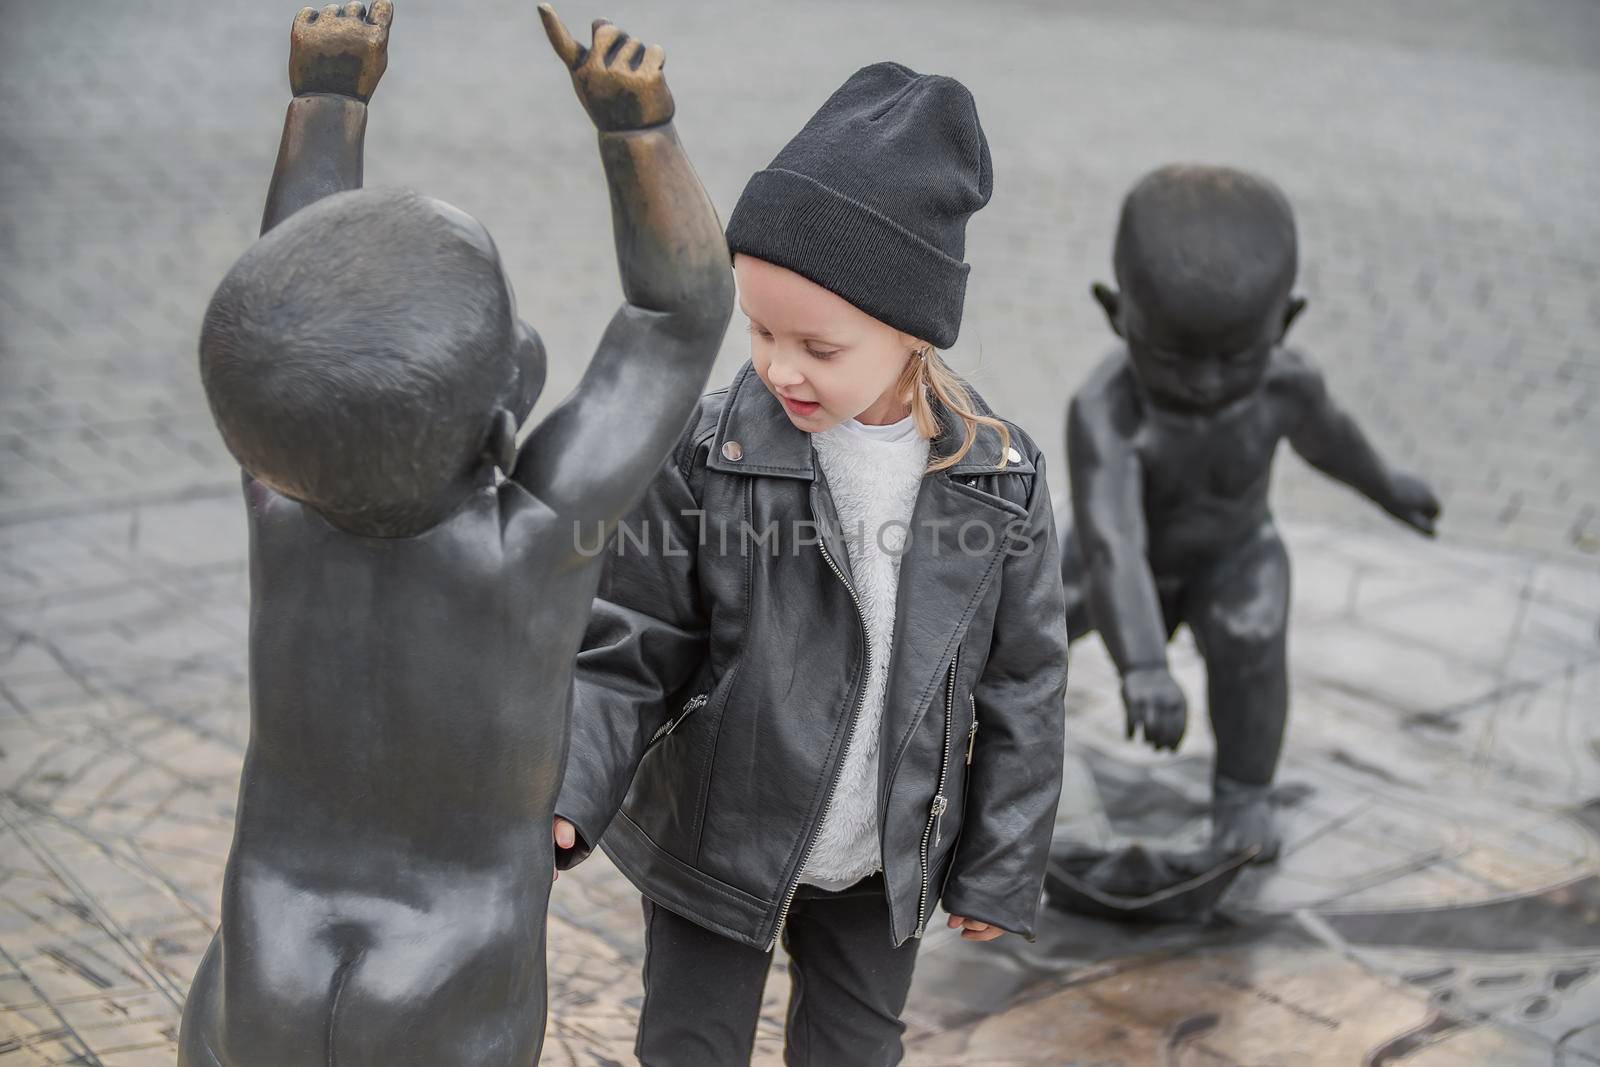 little girl is playing in the city square